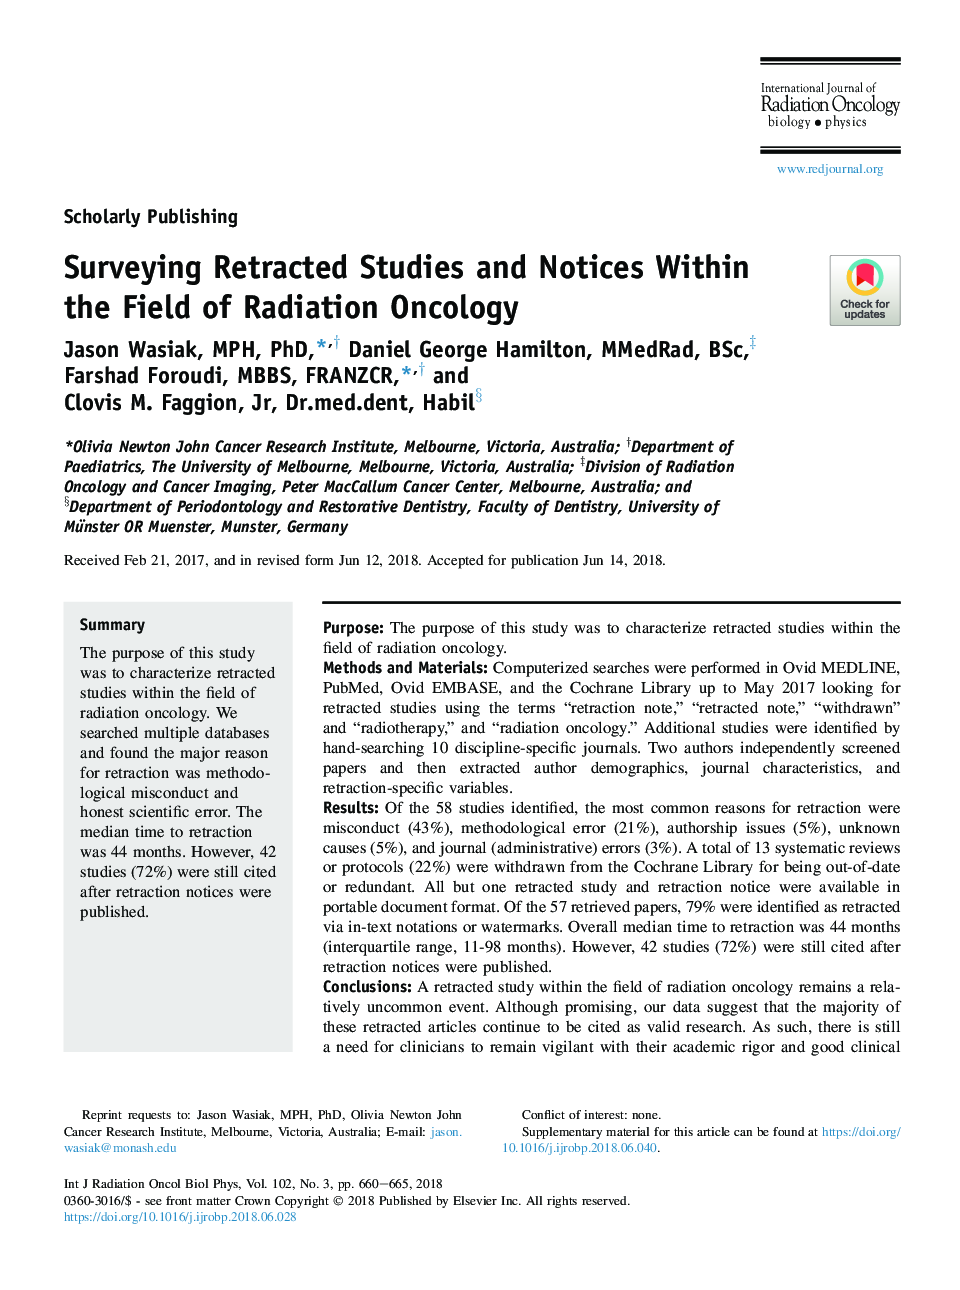 Surveying Retracted Studies and Notices Within the Field of Radiation Oncology